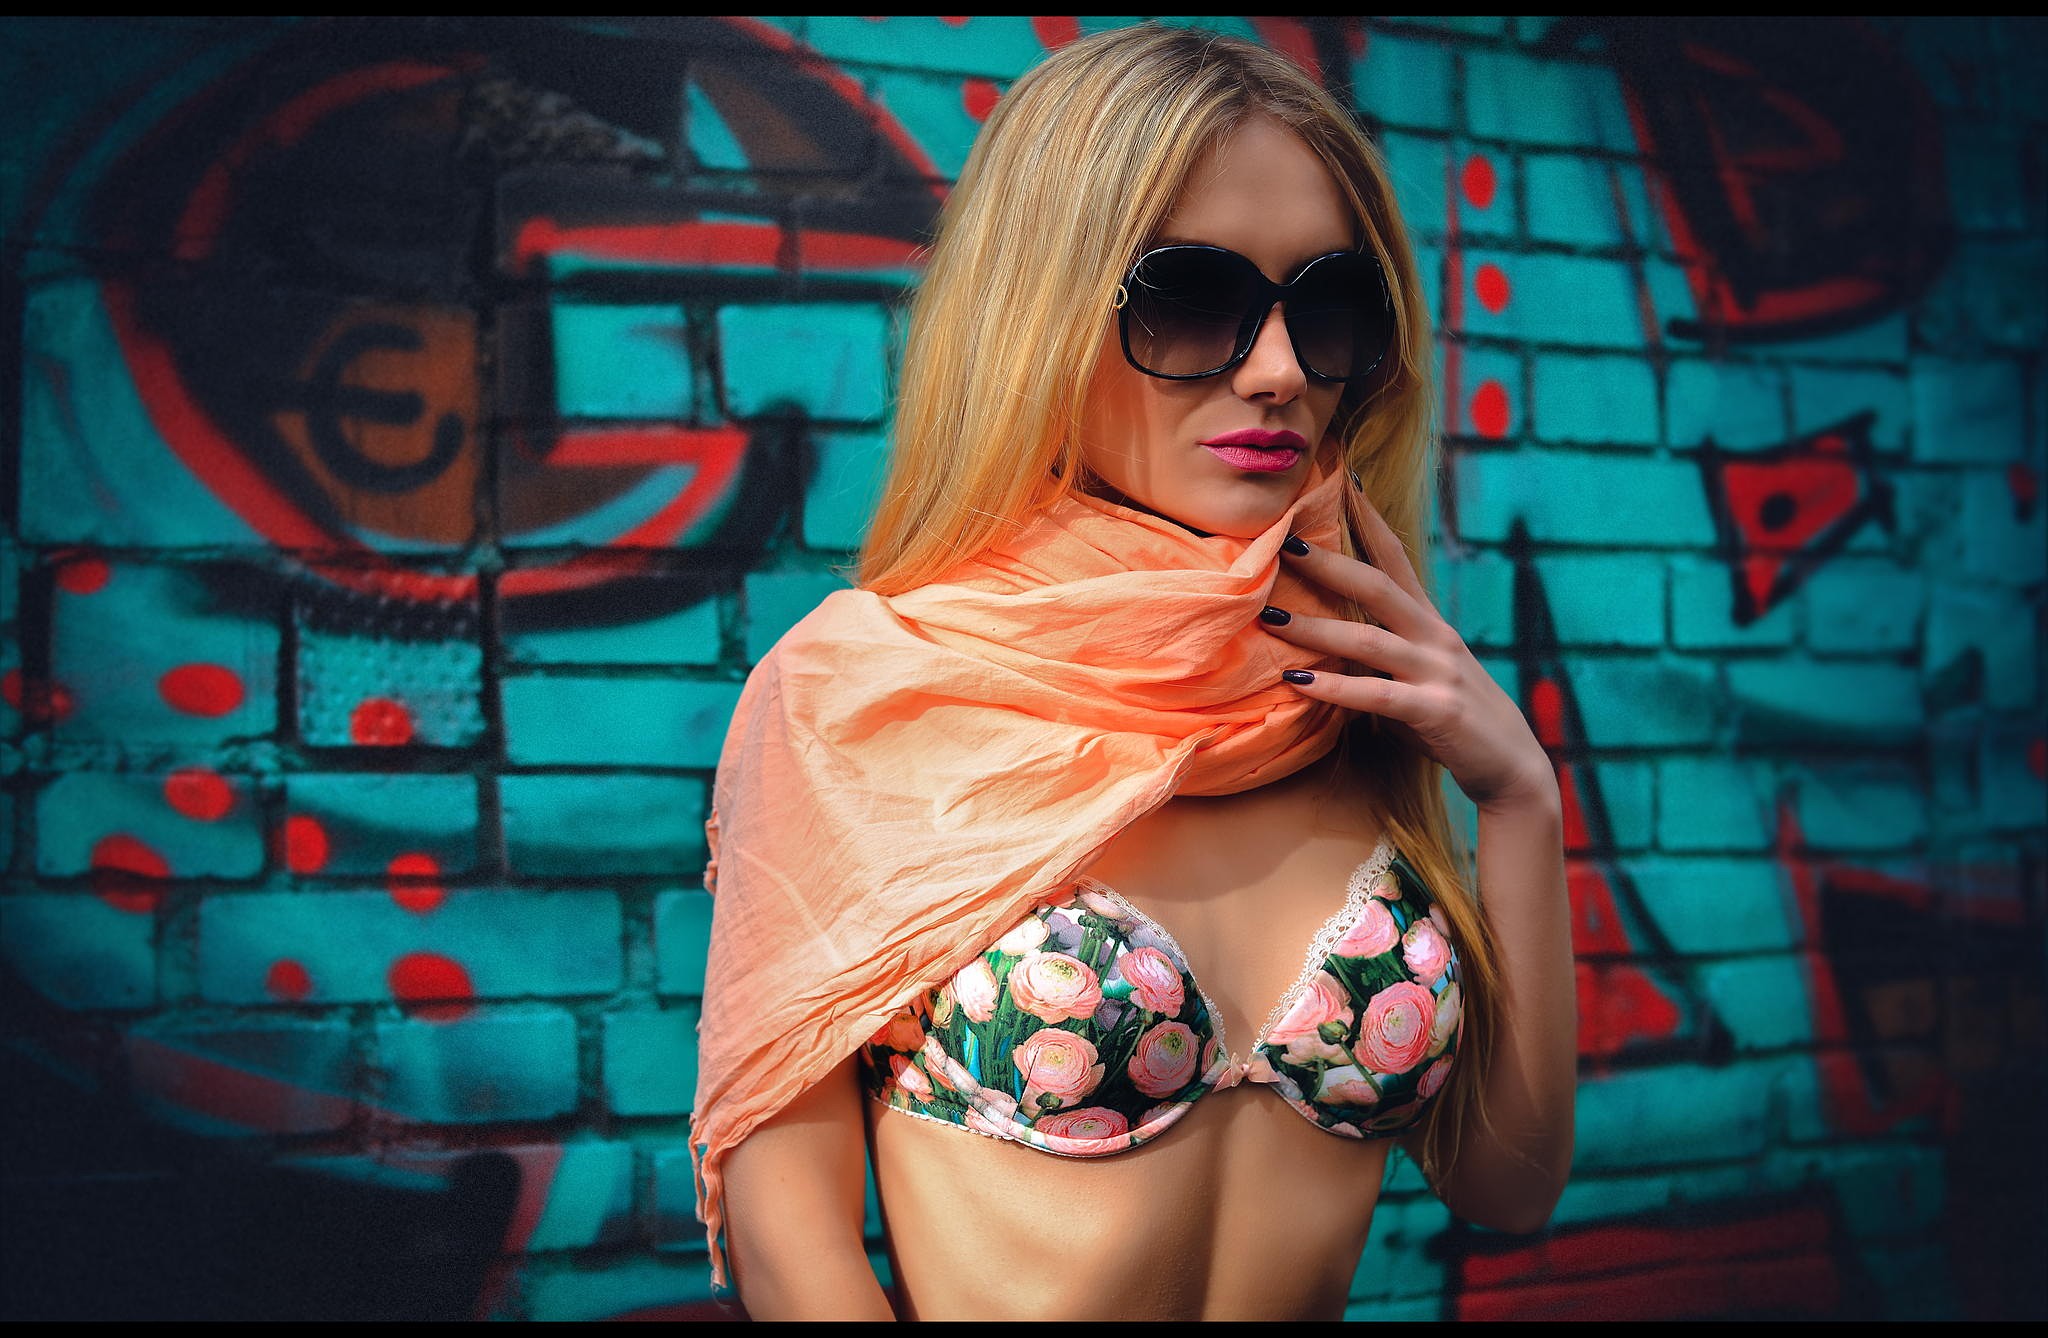 People 2048x1338 women model blonde lingerie scarf colorful women with shades sunglasses bra lipstick painted nails black nails dyed hair wall graffiti Sergey Alexandrov